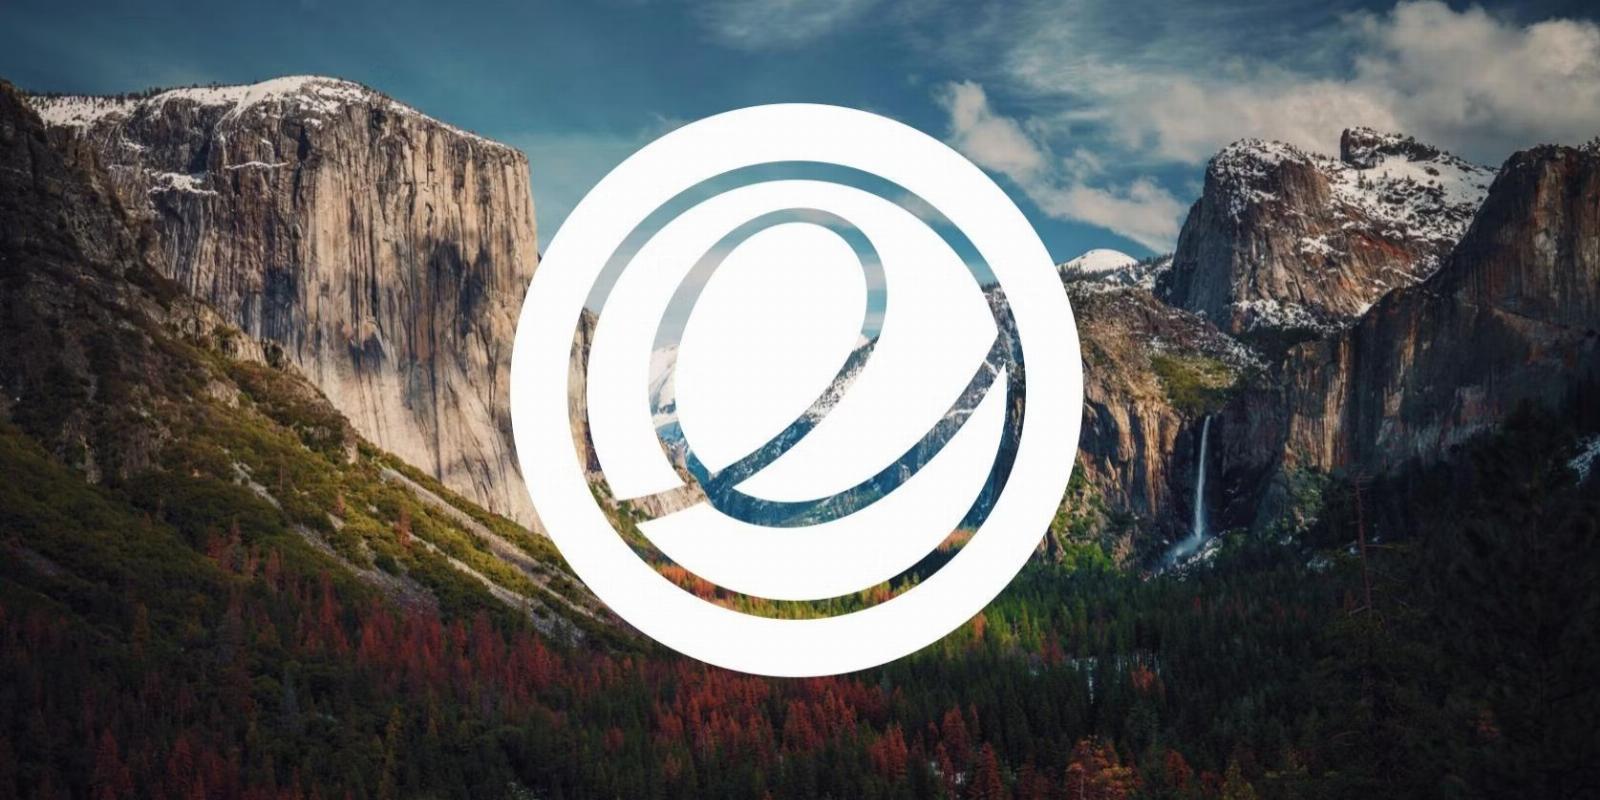 elementary OS 7 Is Now Available: Here’s What’s New